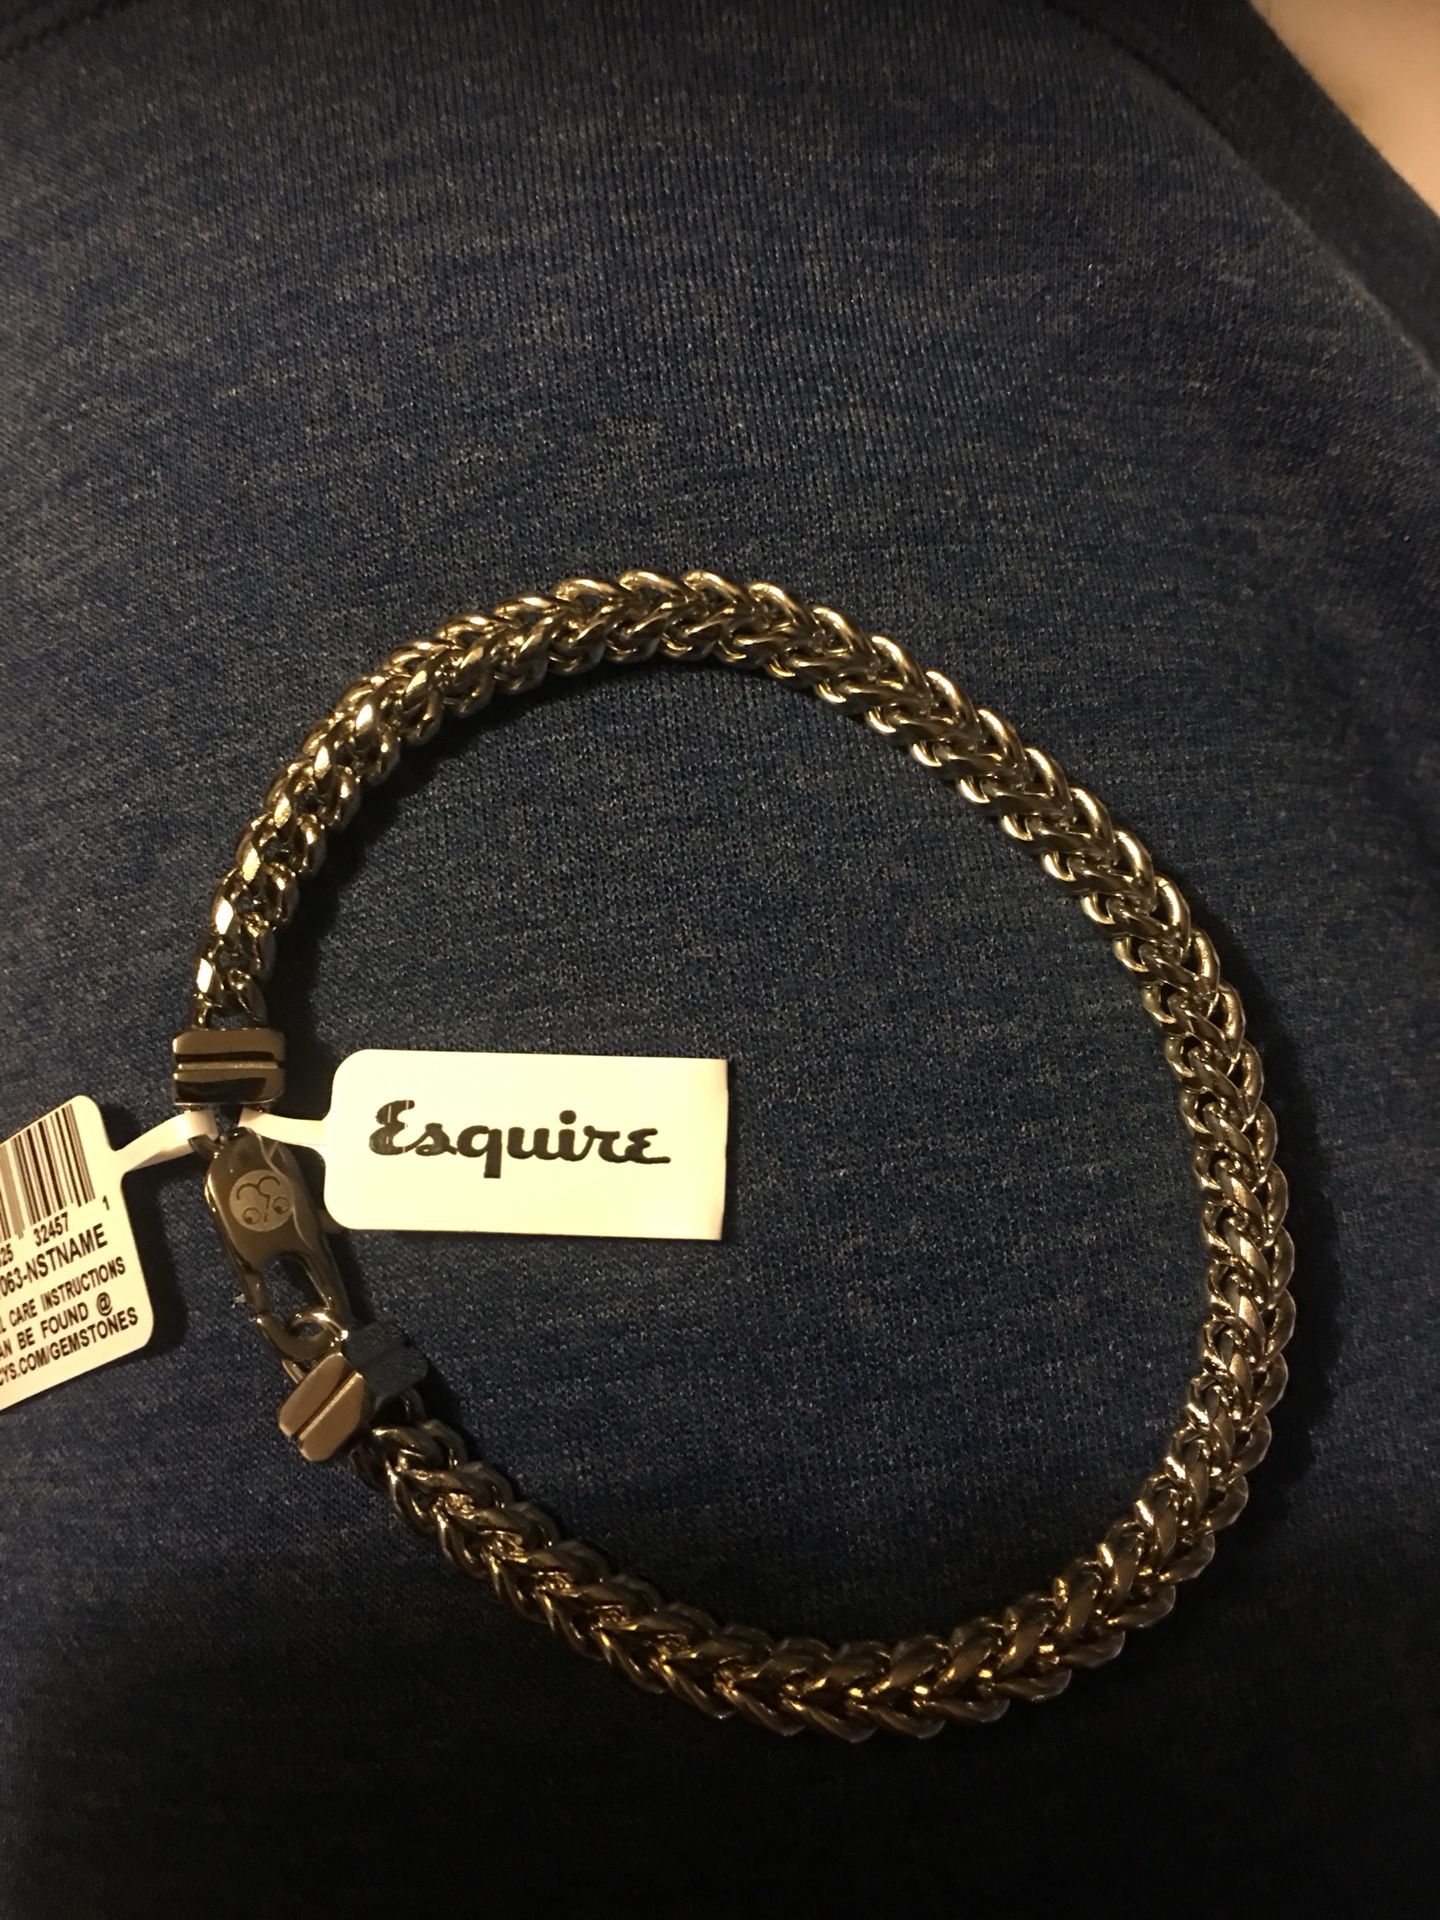 New Men’s Esquire Stainless Steel Bracelet. Tags Attached